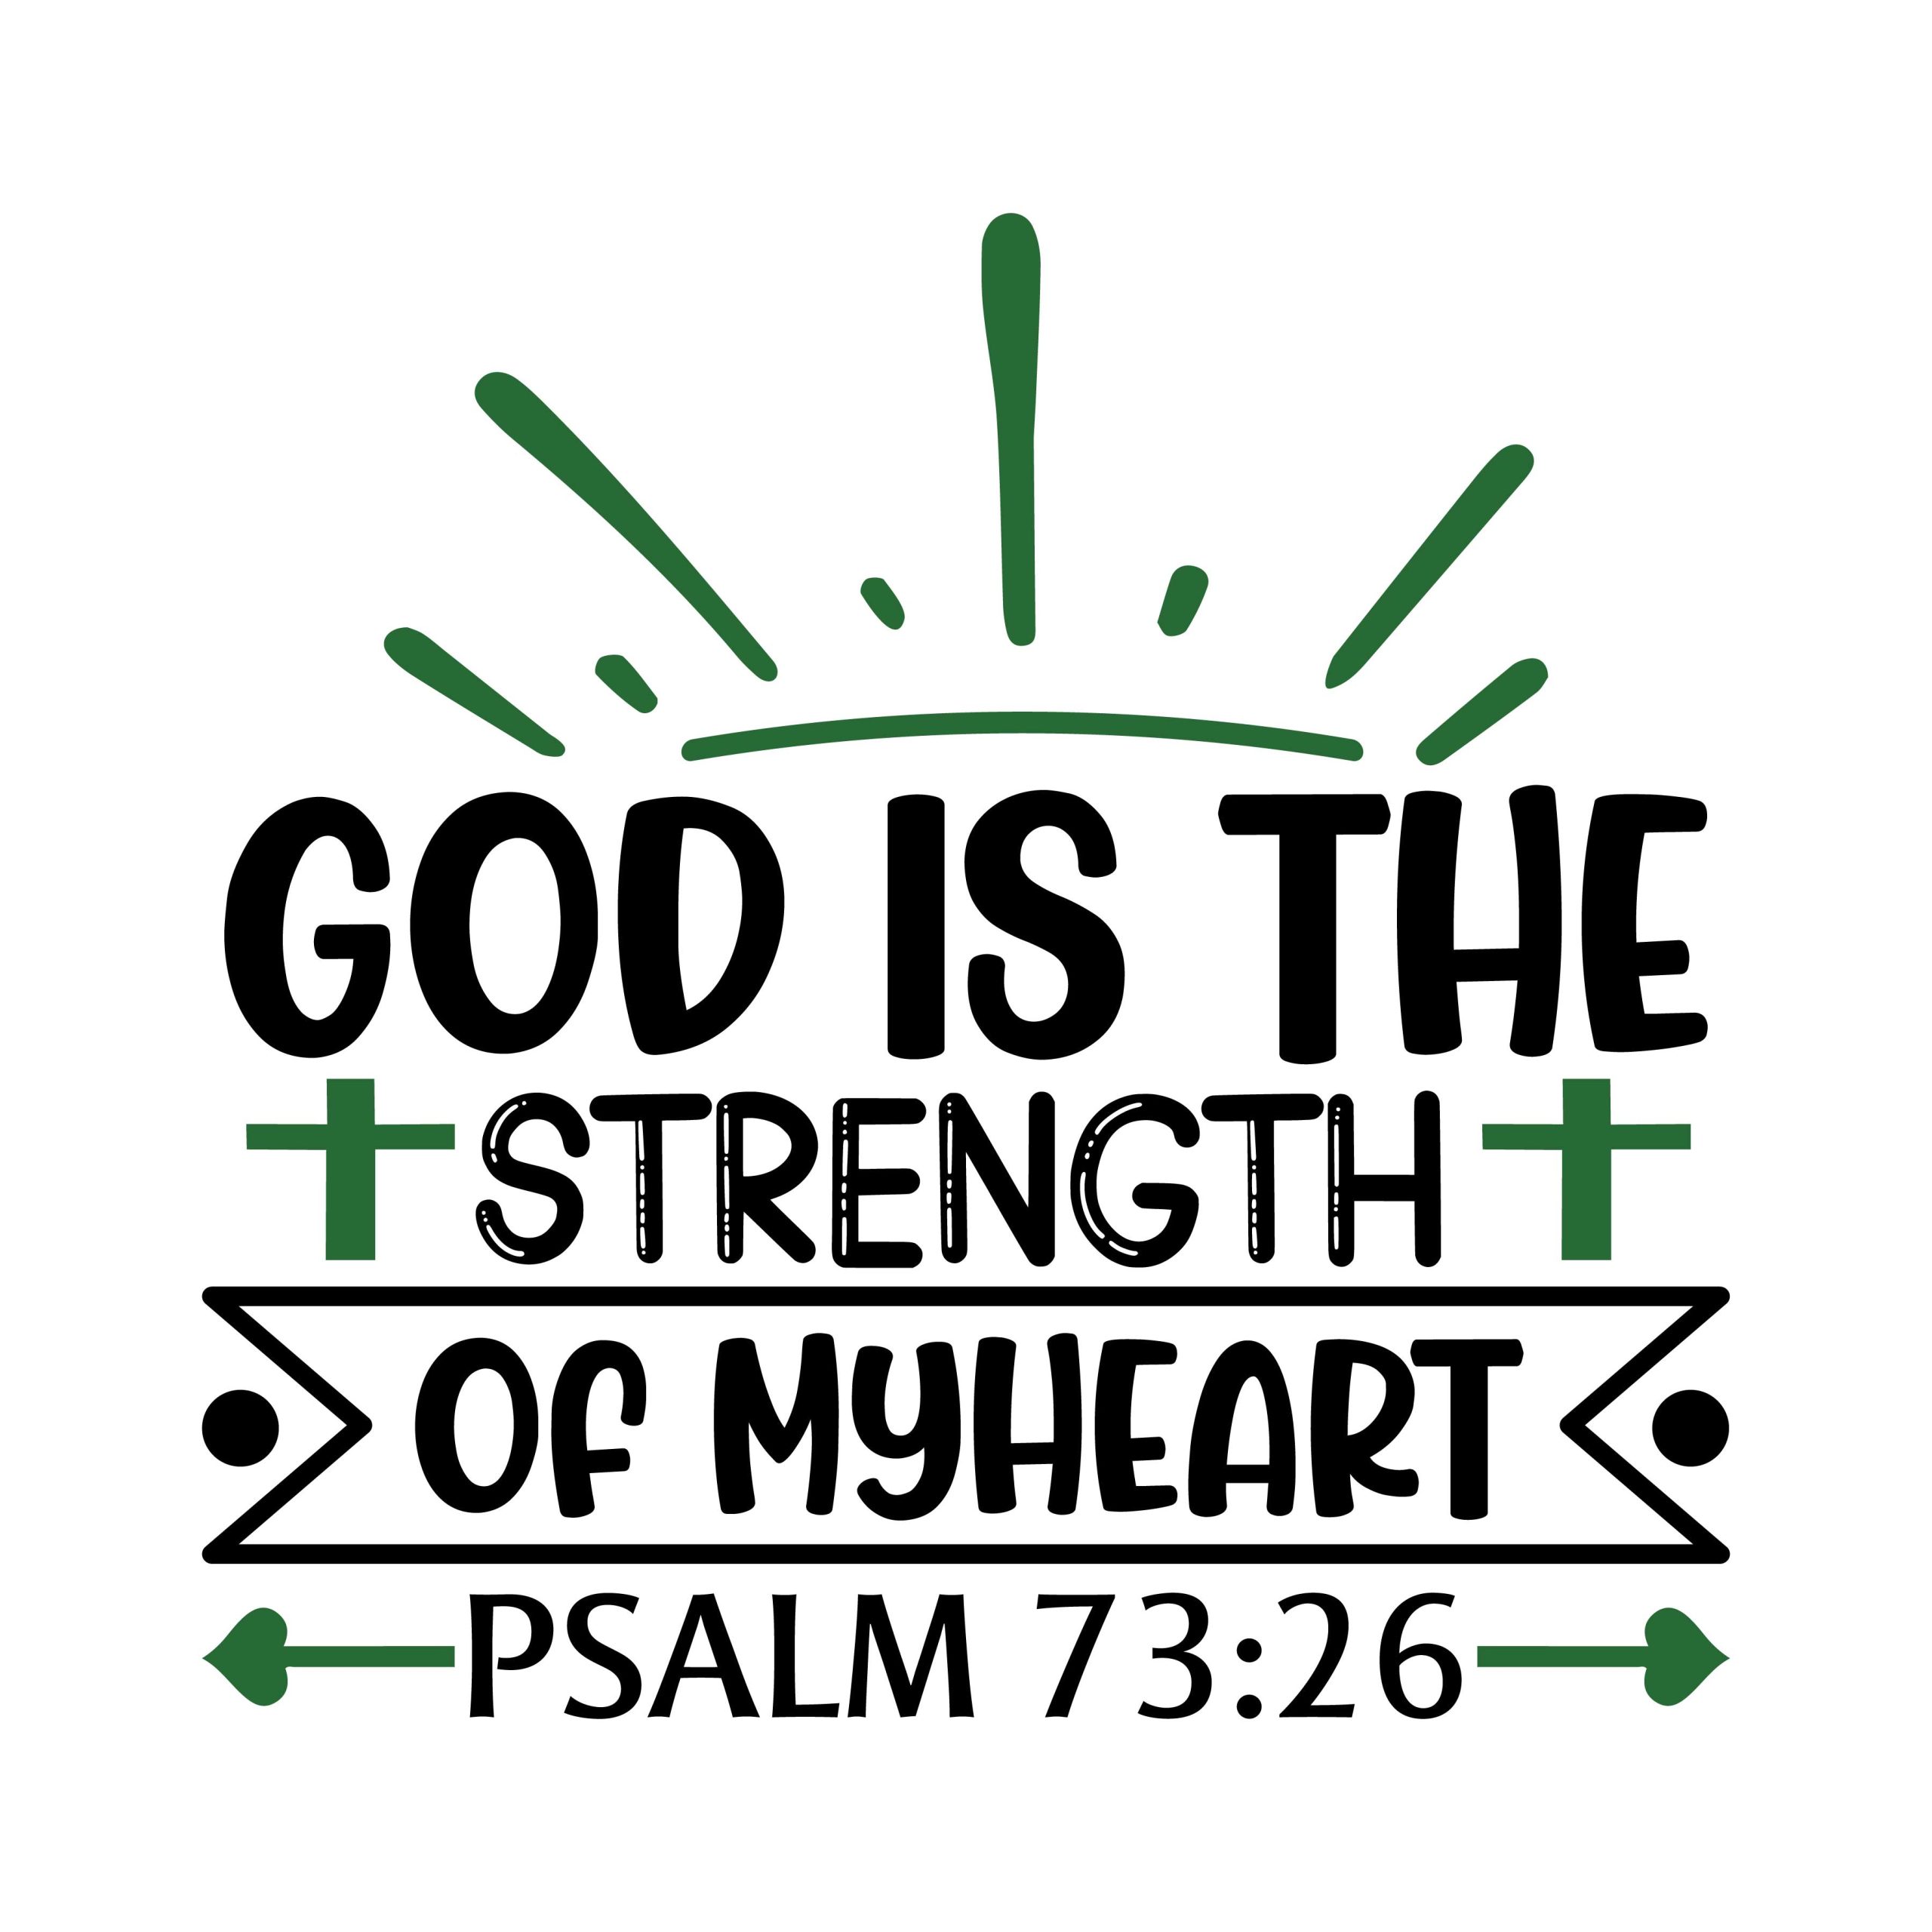 God is the strength of my heart psalm 73:26, bible verses, scripture verses, svg files, passages, sayings, cricut designs, silhouette, embroidery, bundle, free cut files, design space, vector